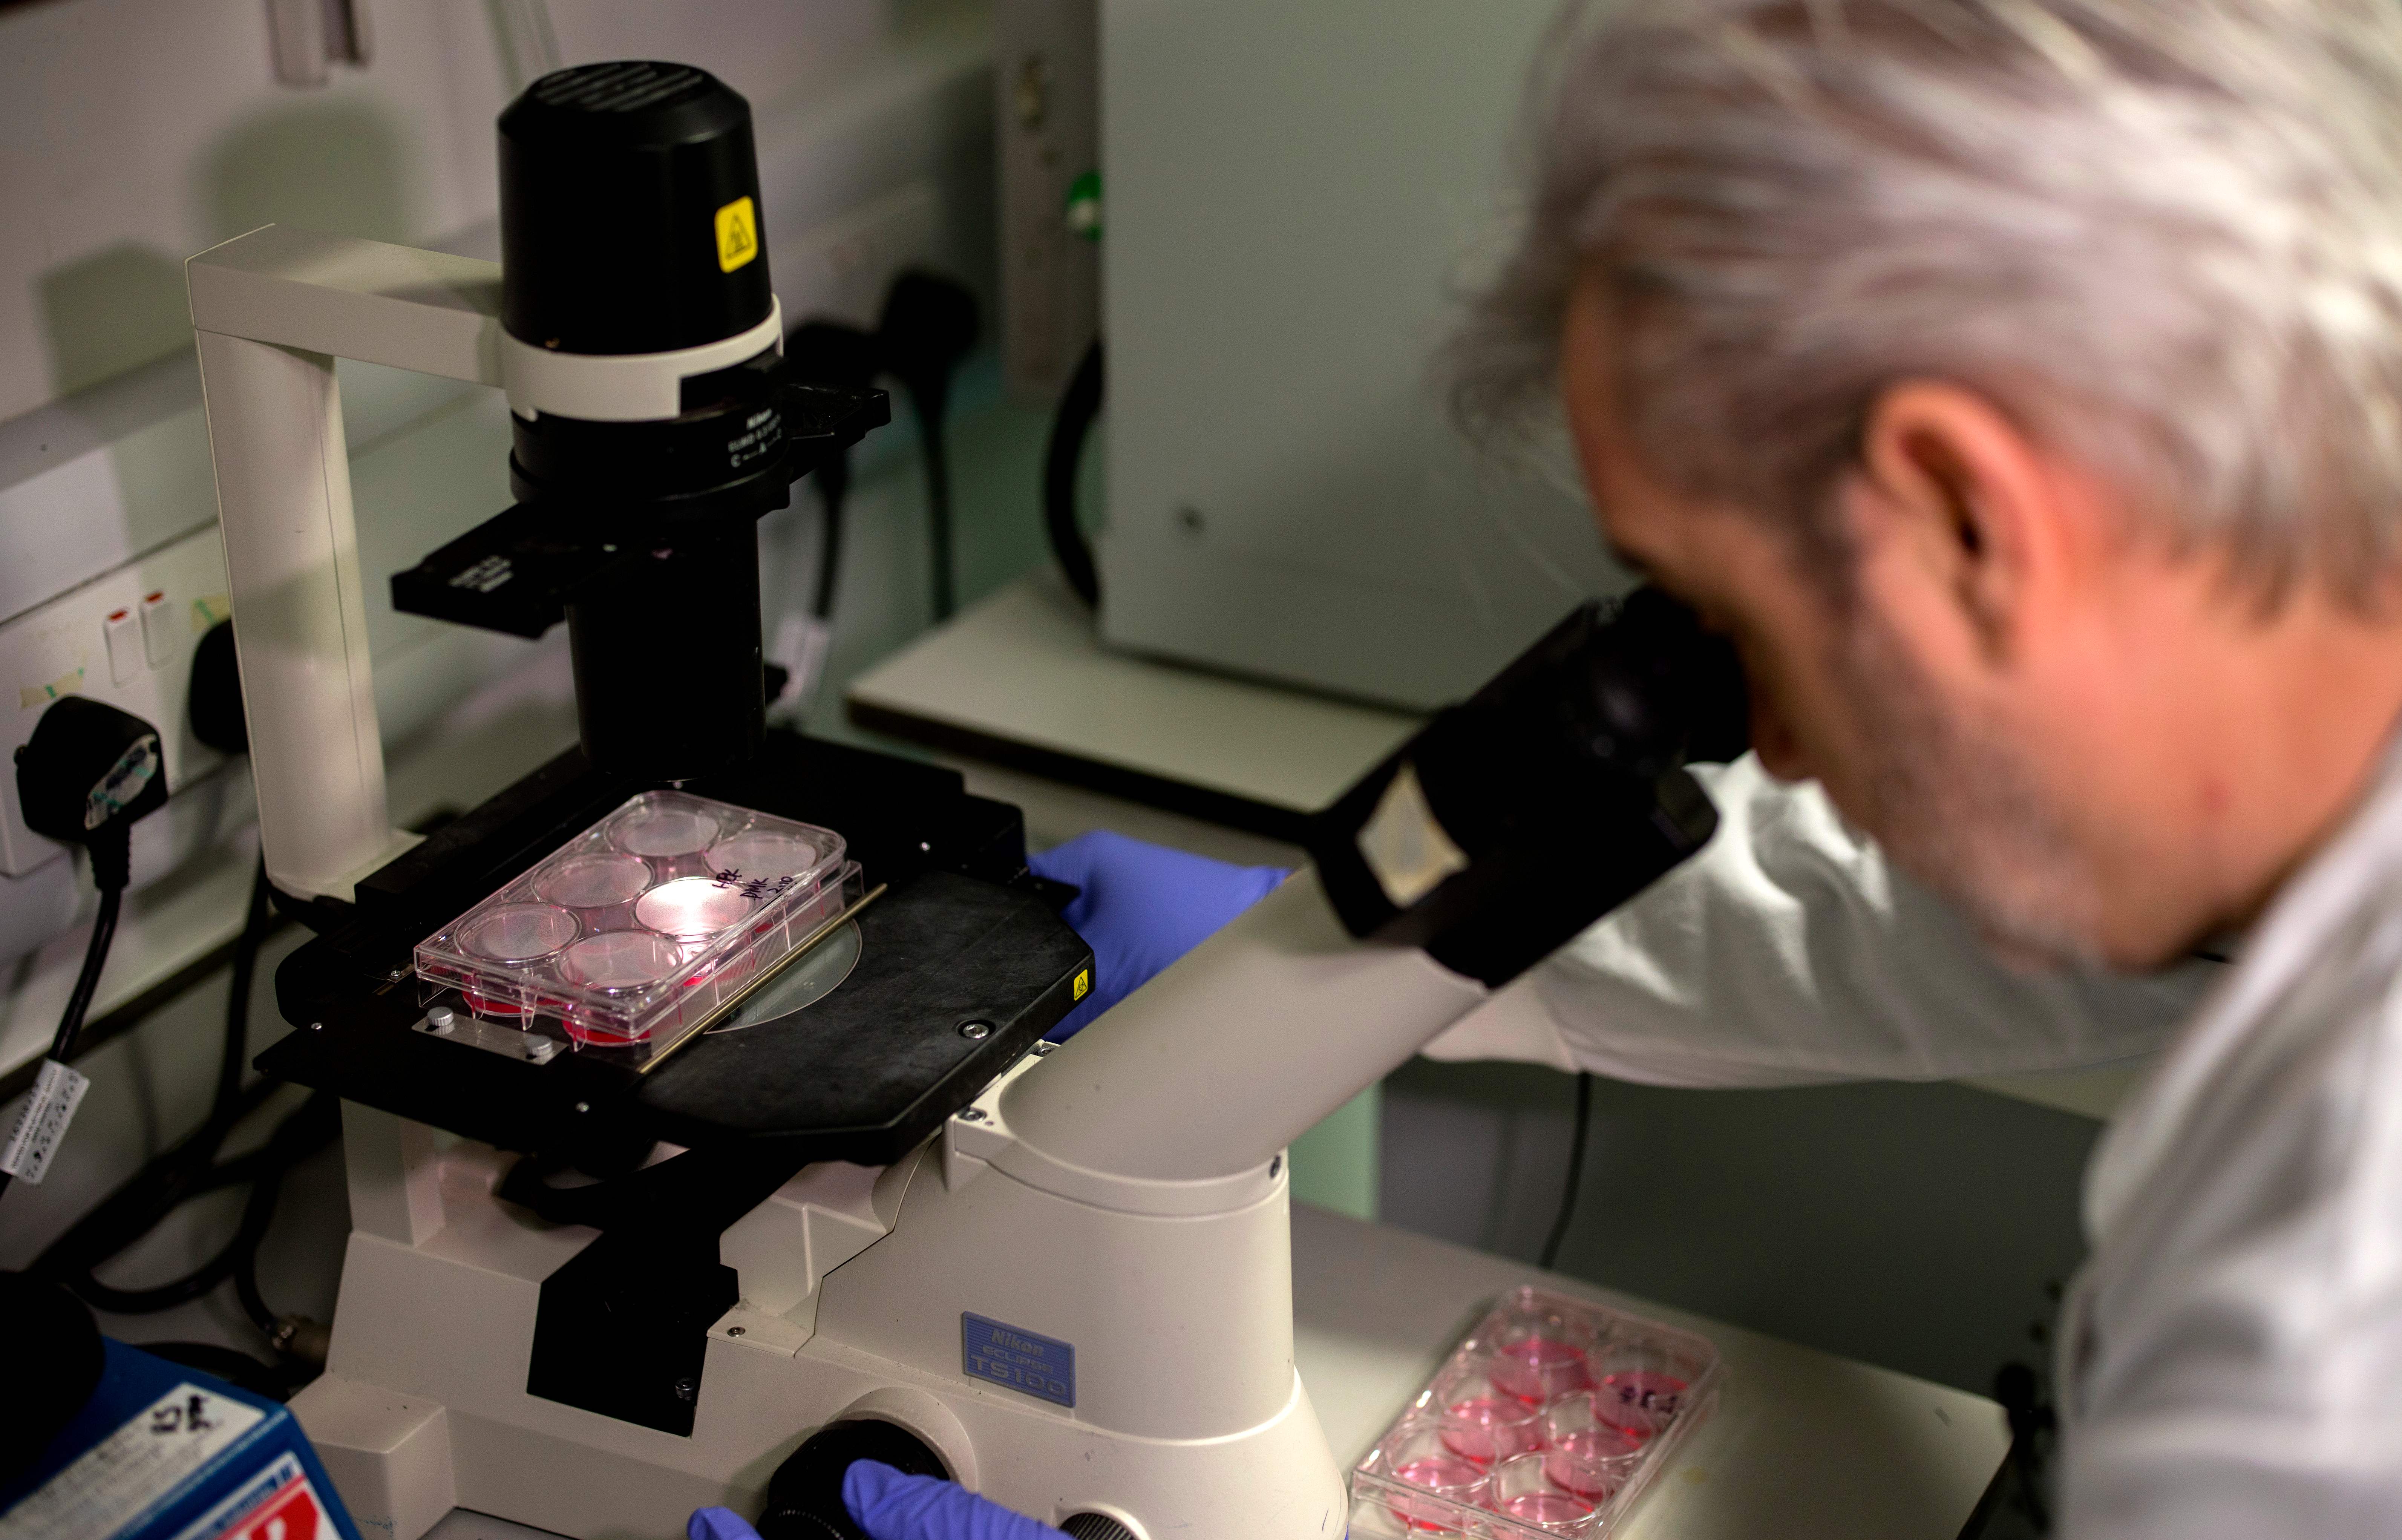 Doctor Paul McKay, who is working on an vaccine for the 2019-nCoV strain of the novel coronavirus, Covid-19,, poses for a photograph using a microscope to look at bacteria containing coronavirus, Covid-19, DNA fragments. (TOLGA AKMEN/AFP via Getty Images)